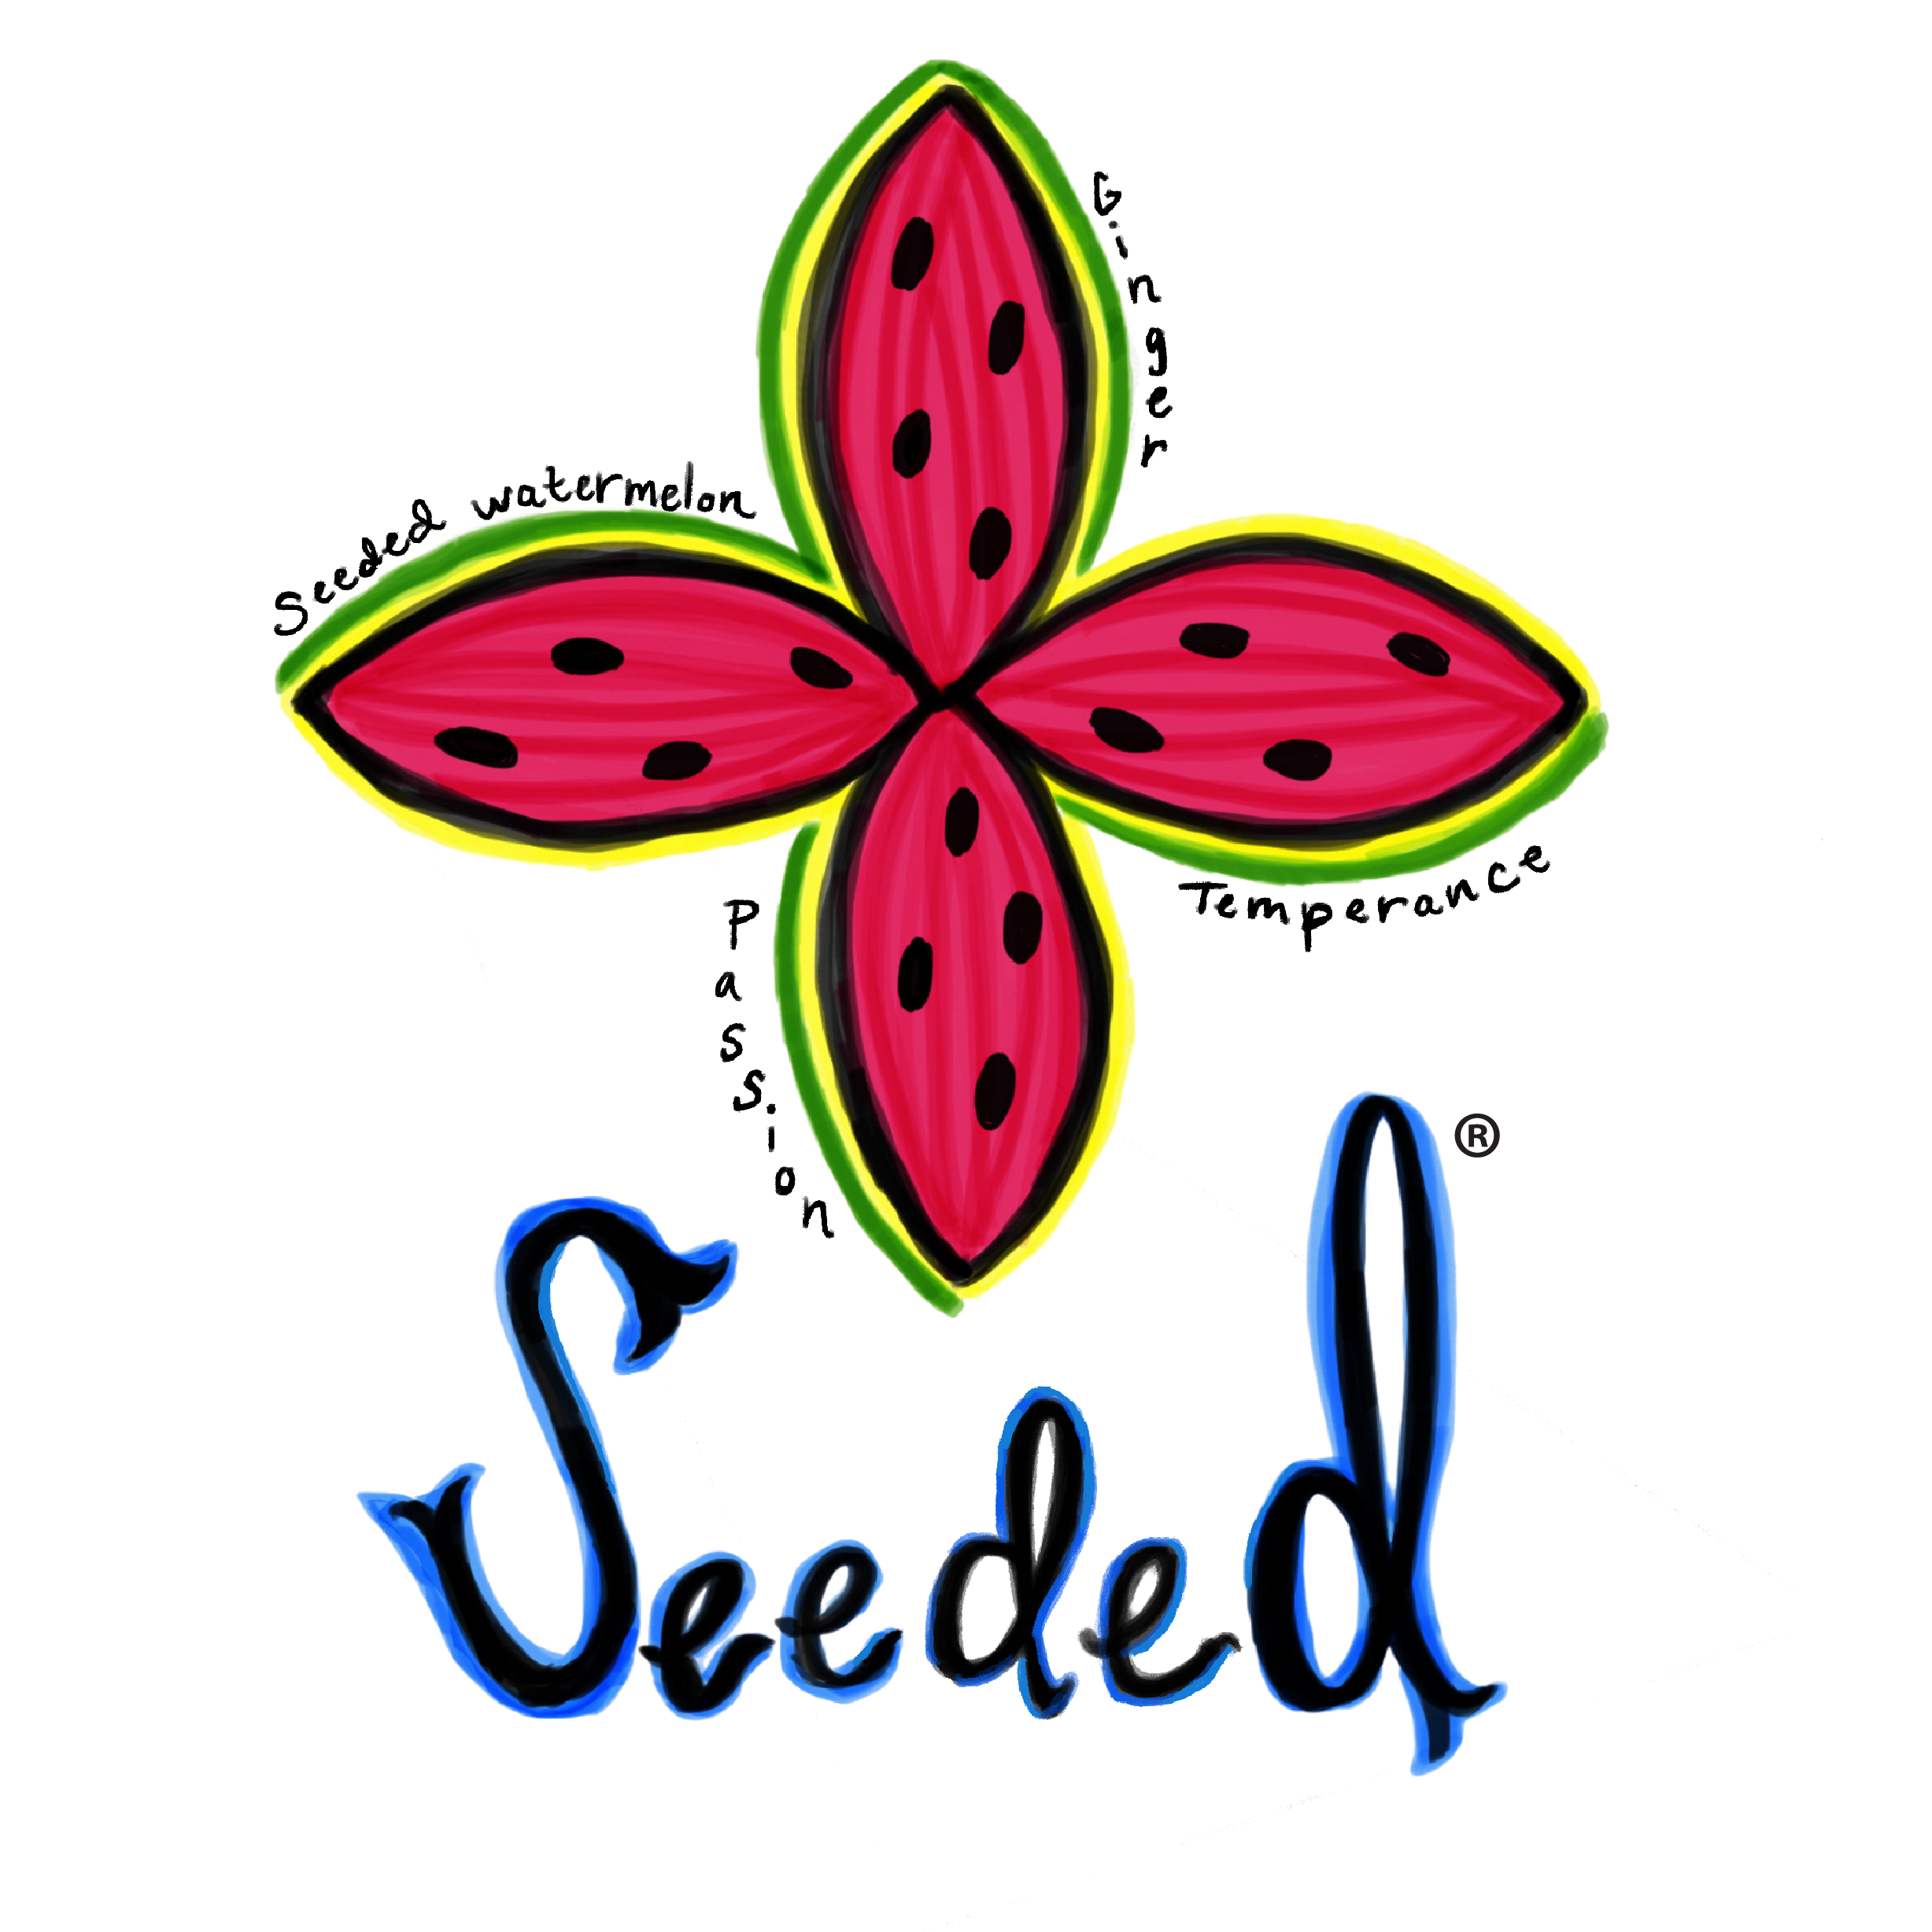 Seeded logo-01.PNG